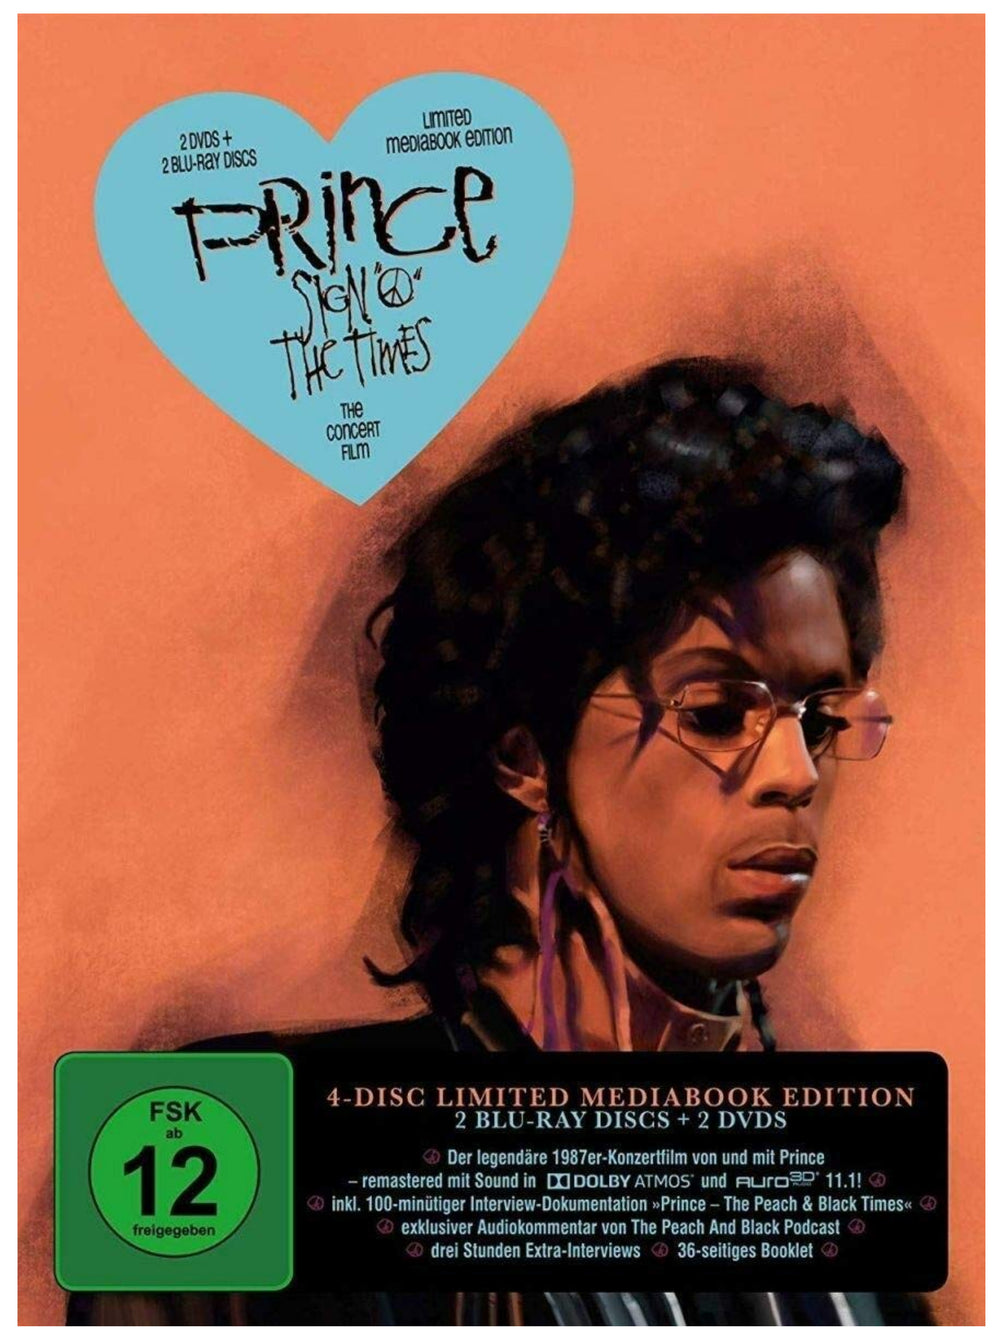 Prince Sign "O" The Times LTd Edition 4 Disc 2 Blu-ray 2 DVD Set  WILL PLAY ON ALL MACHINES